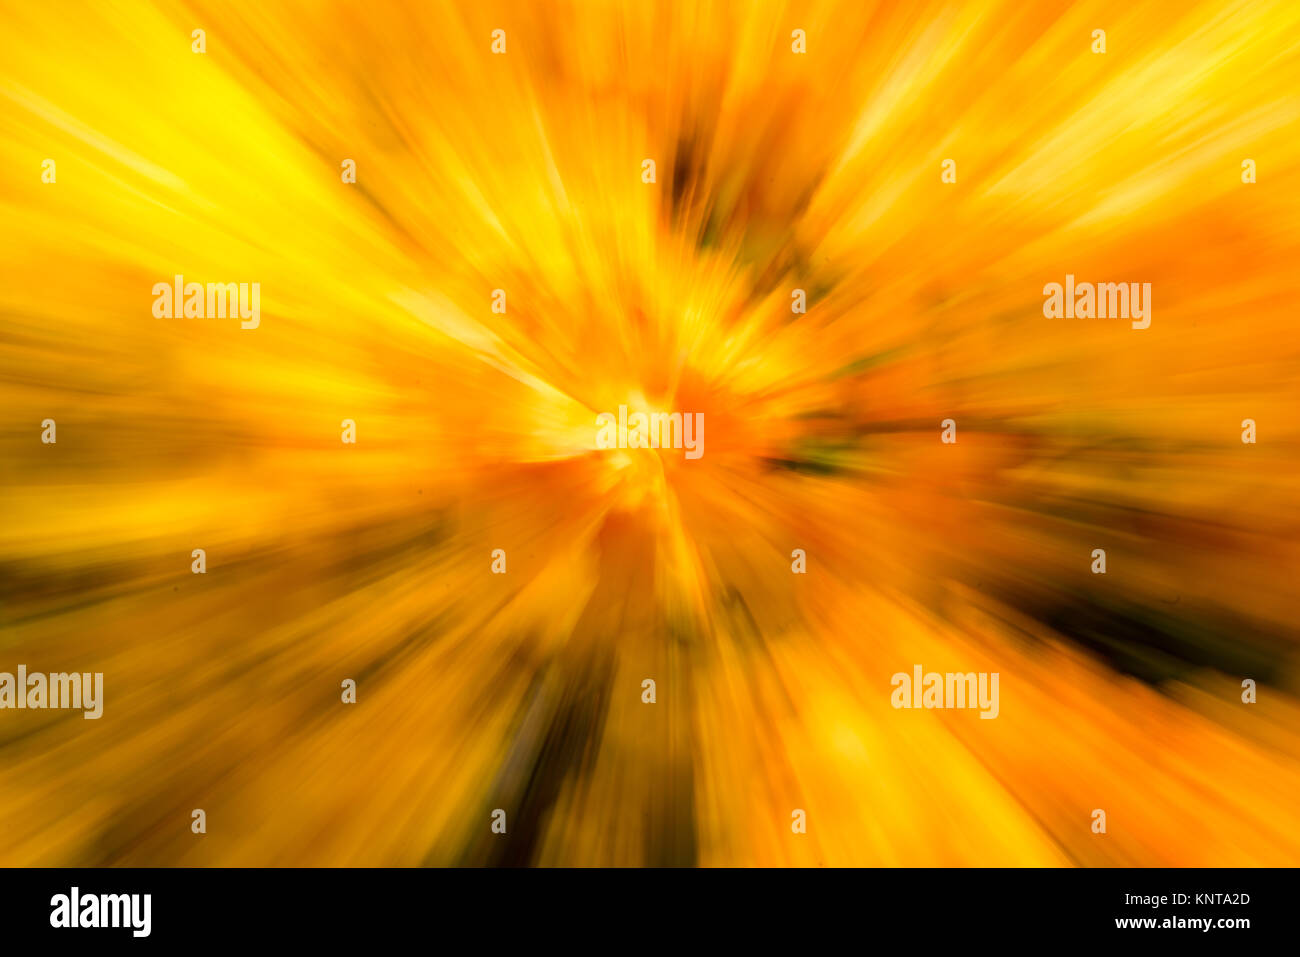 Abstract background with orange and yellow Zoom in effect. Stock Photo